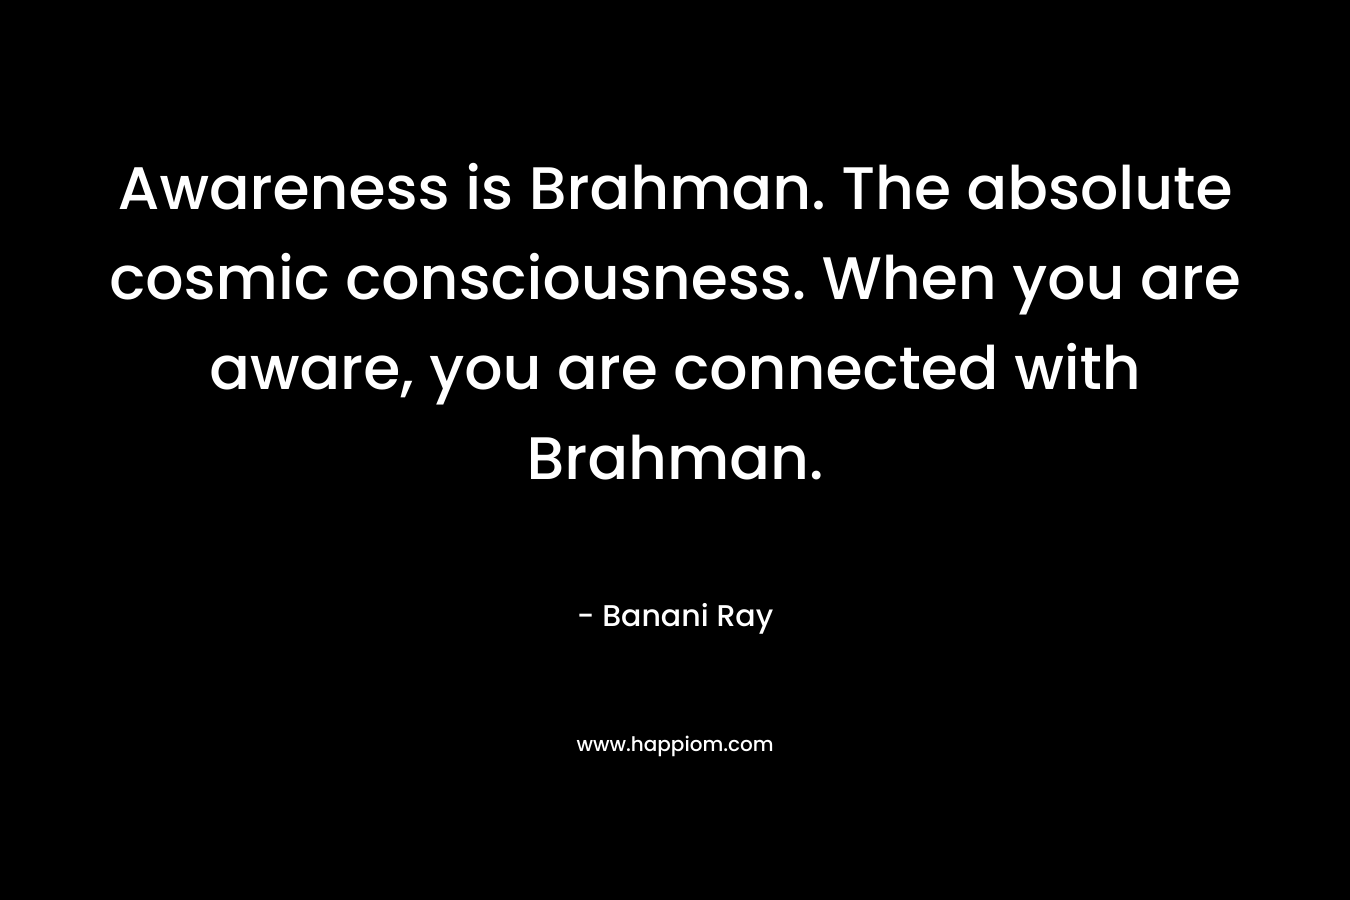 Awareness is Brahman. The absolute cosmic consciousness. When you are aware, you are connected with Brahman.